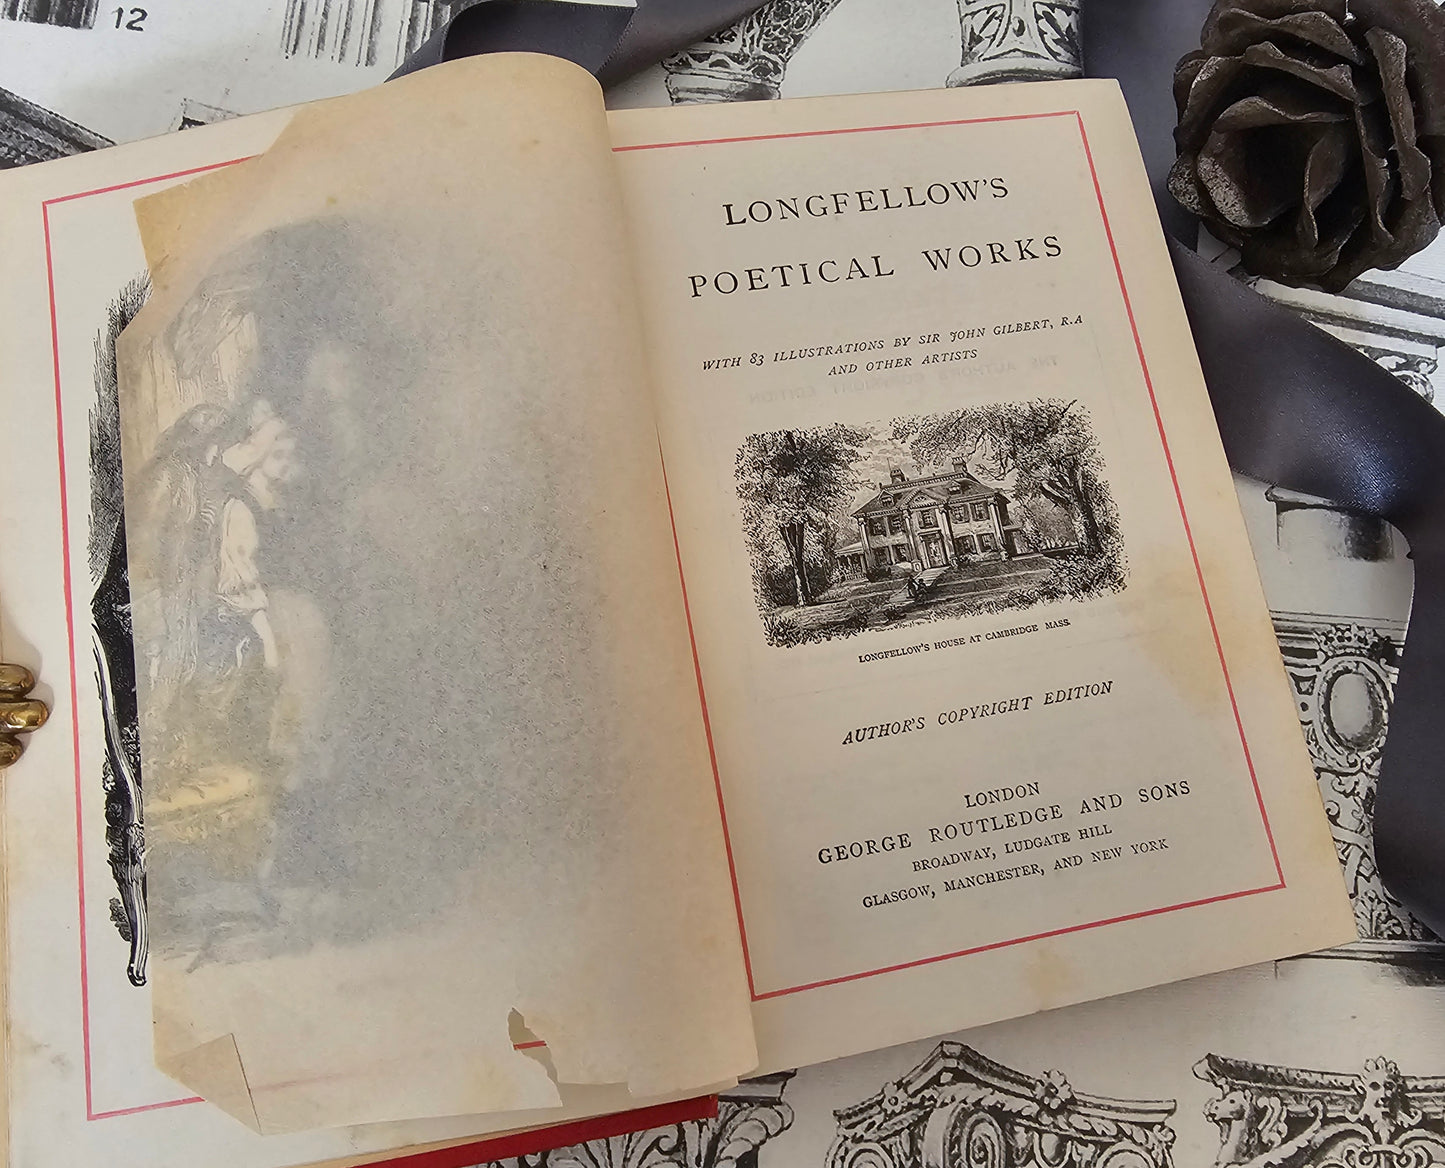 1890s Longfellow's Poetical Works, London / Routledge, London / 83 Illustrations / Beautiful Decorative Boards / Good Condition / Gilt Edged